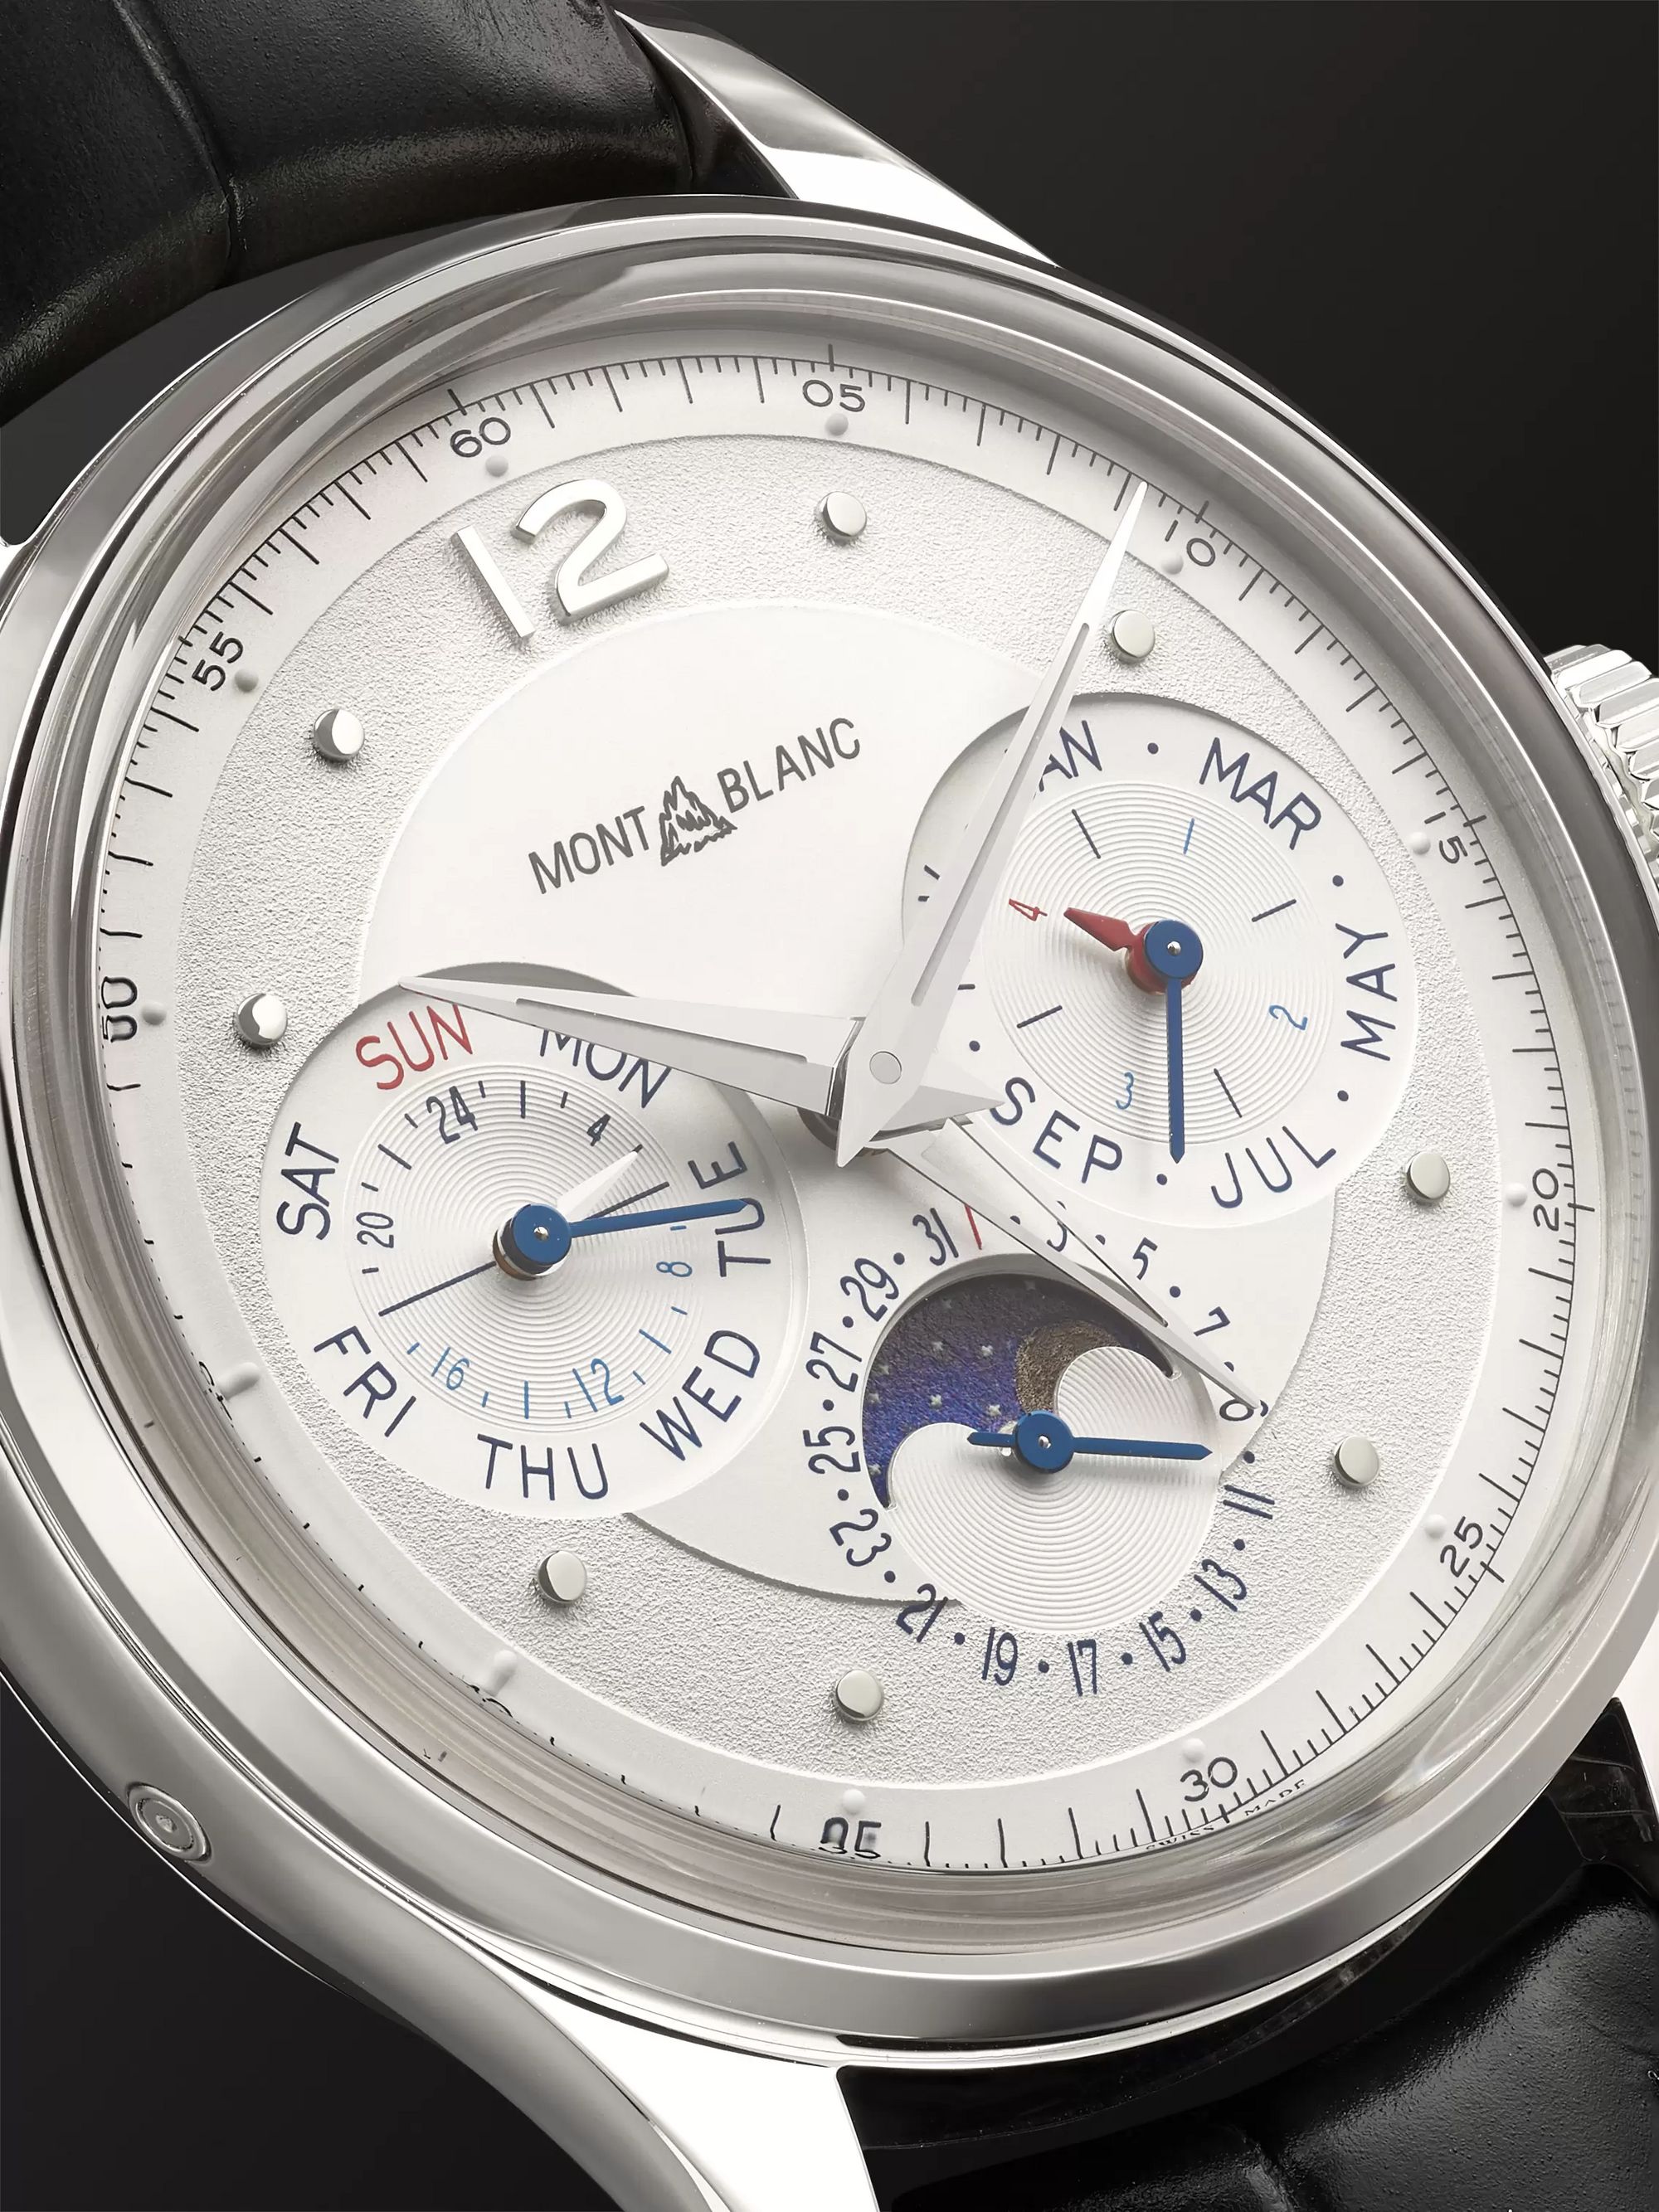 MONTBLANC Heritage Perpetual Calendar Automatic 40mm Stainless Steel and Alligator Watch, Ref. No. 119925